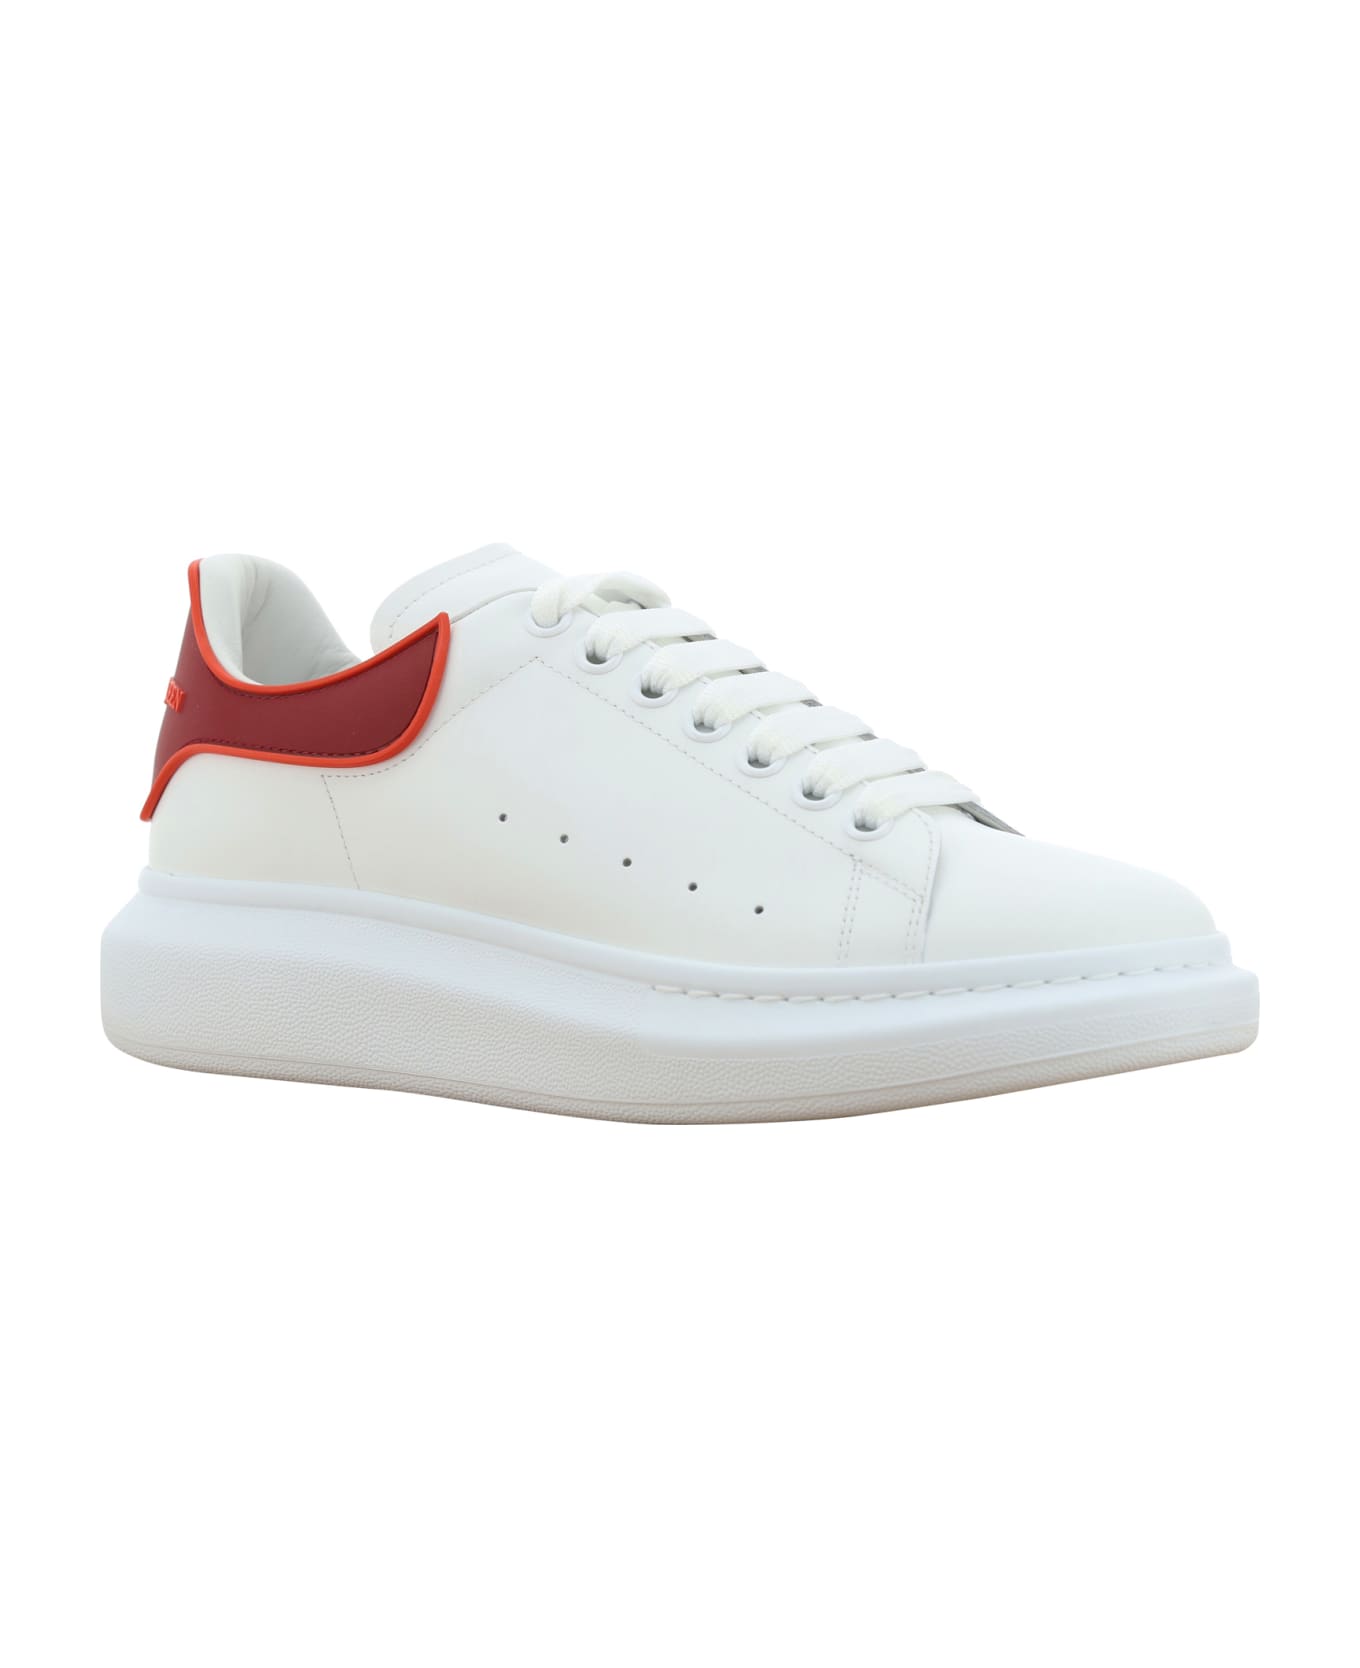 Alexander McQueen Calfskin Sneakers - White/ro.red/sca Red